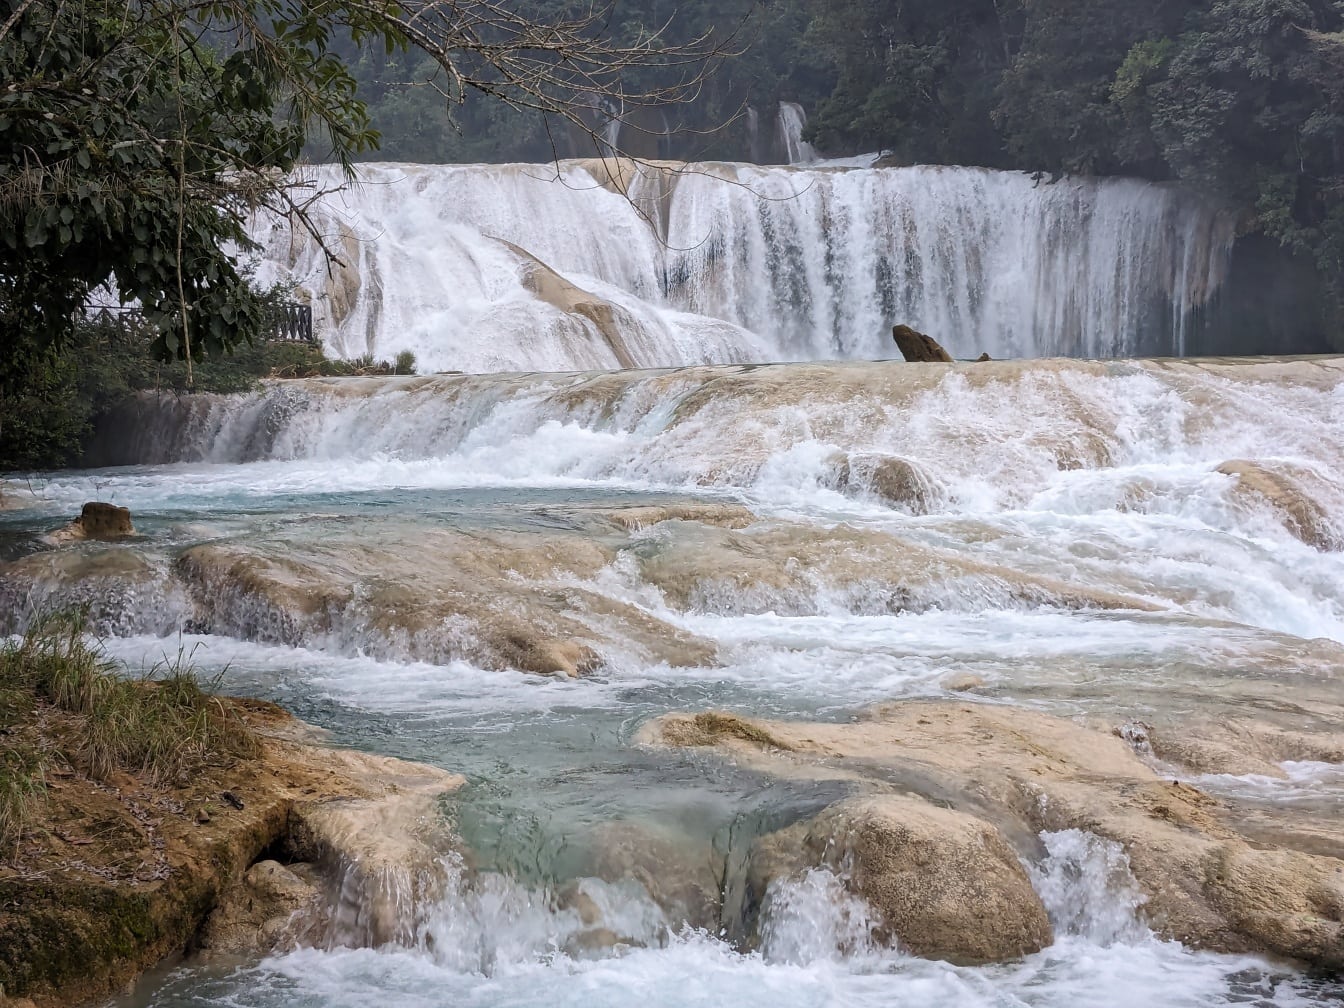 Agua Azul waterfalls in natural park in Mexico with rocks and trees